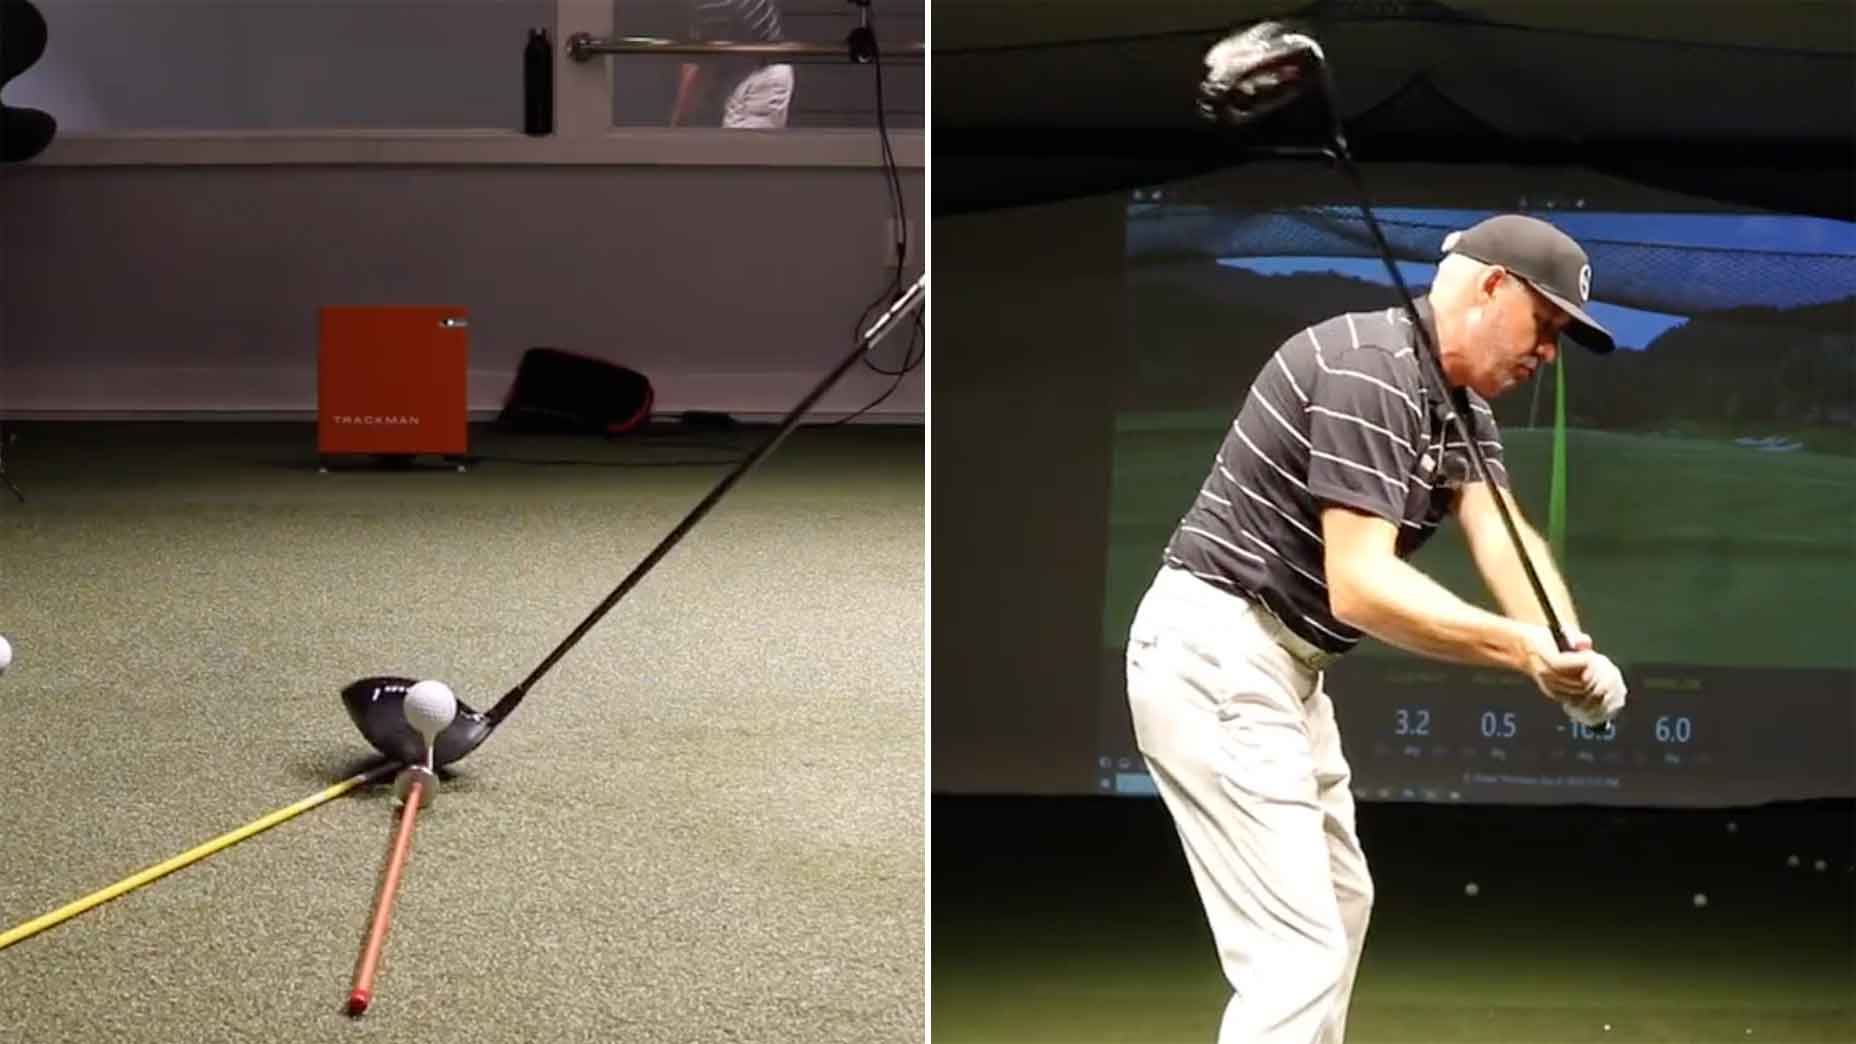 If your miss is a hook, try this simple swing thought to fix it